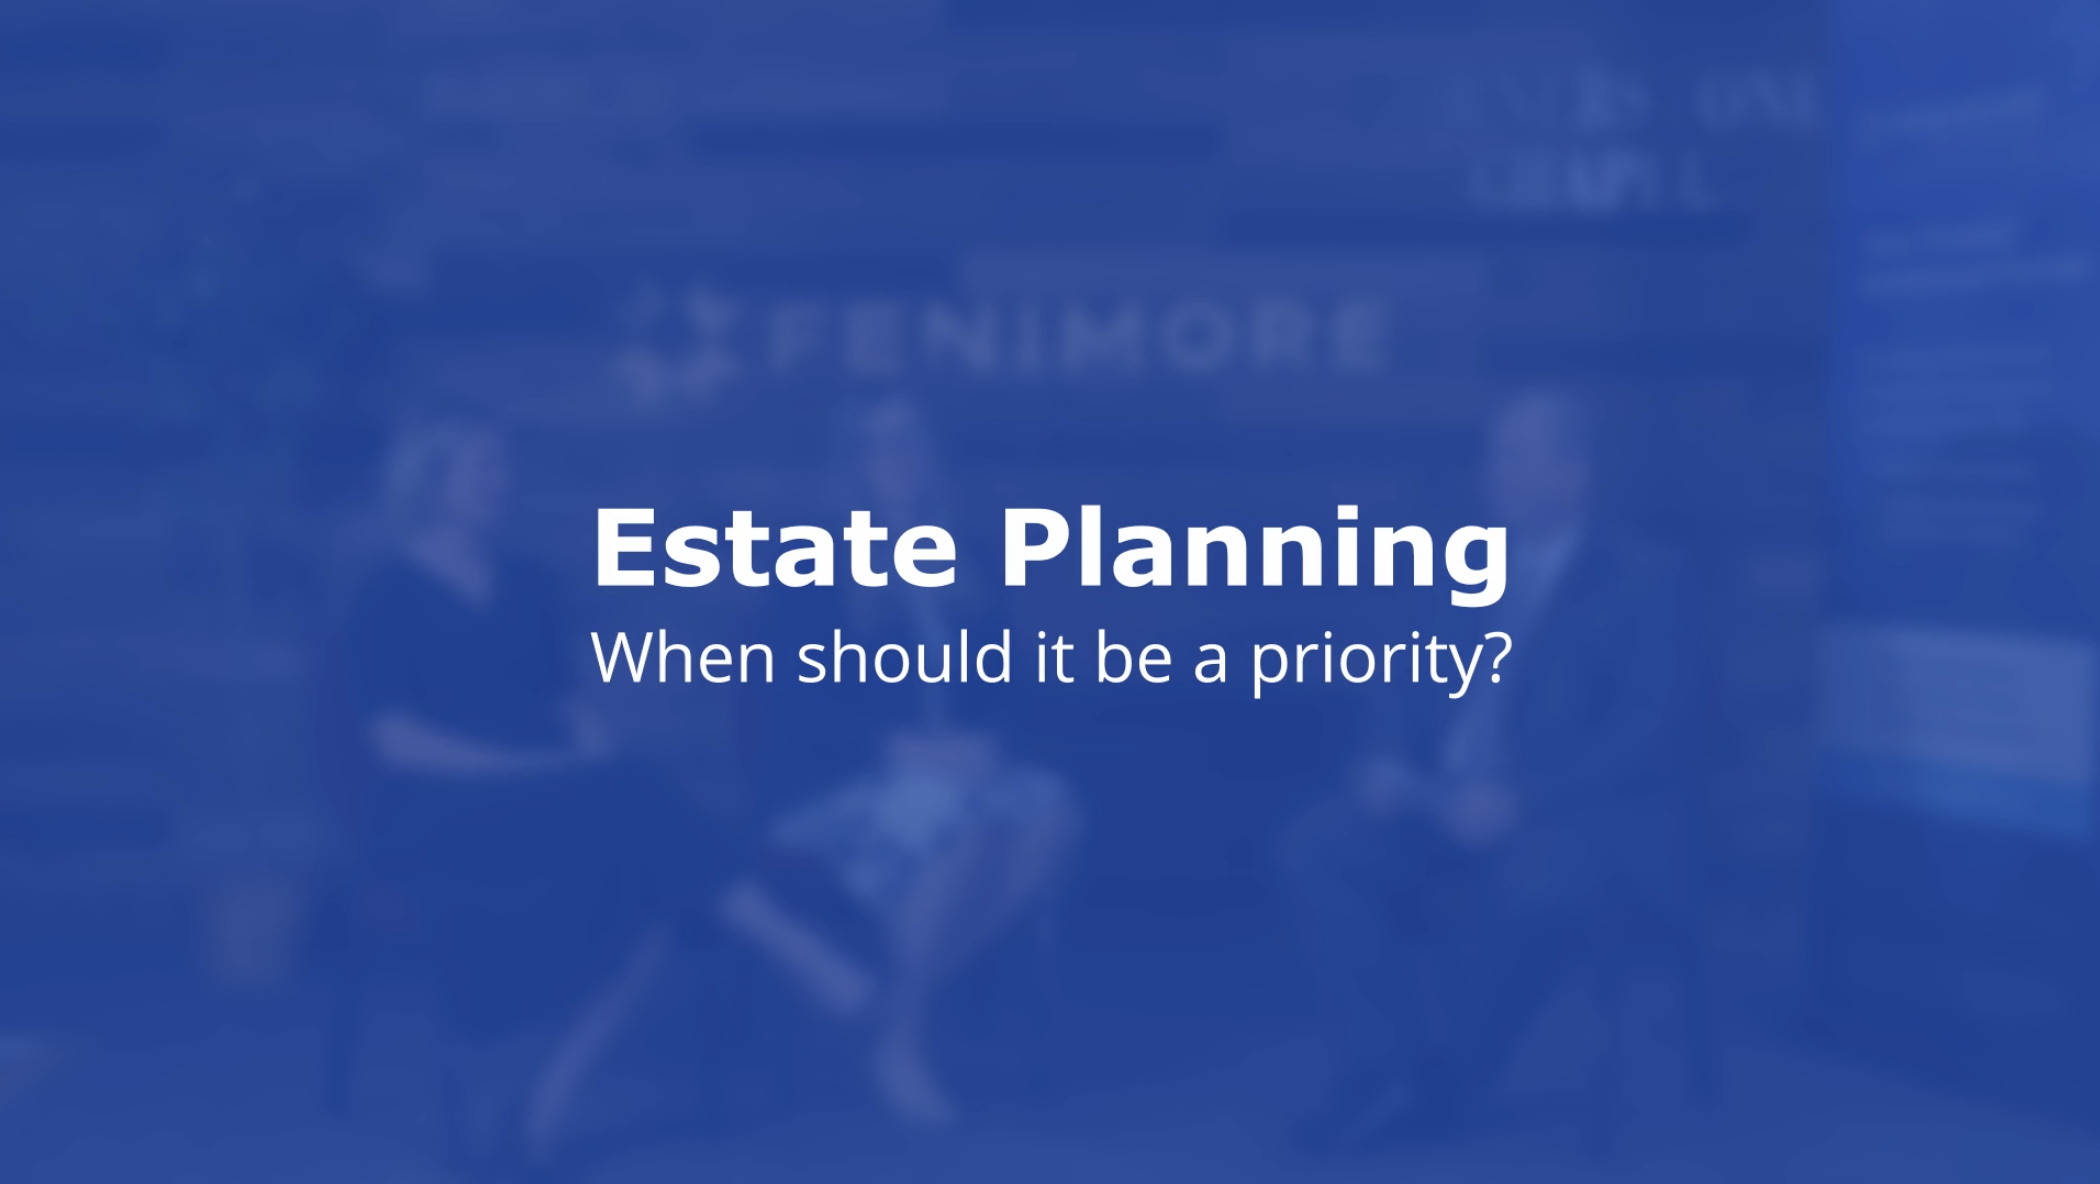 ESTATE PLANNING When should it be a priority?